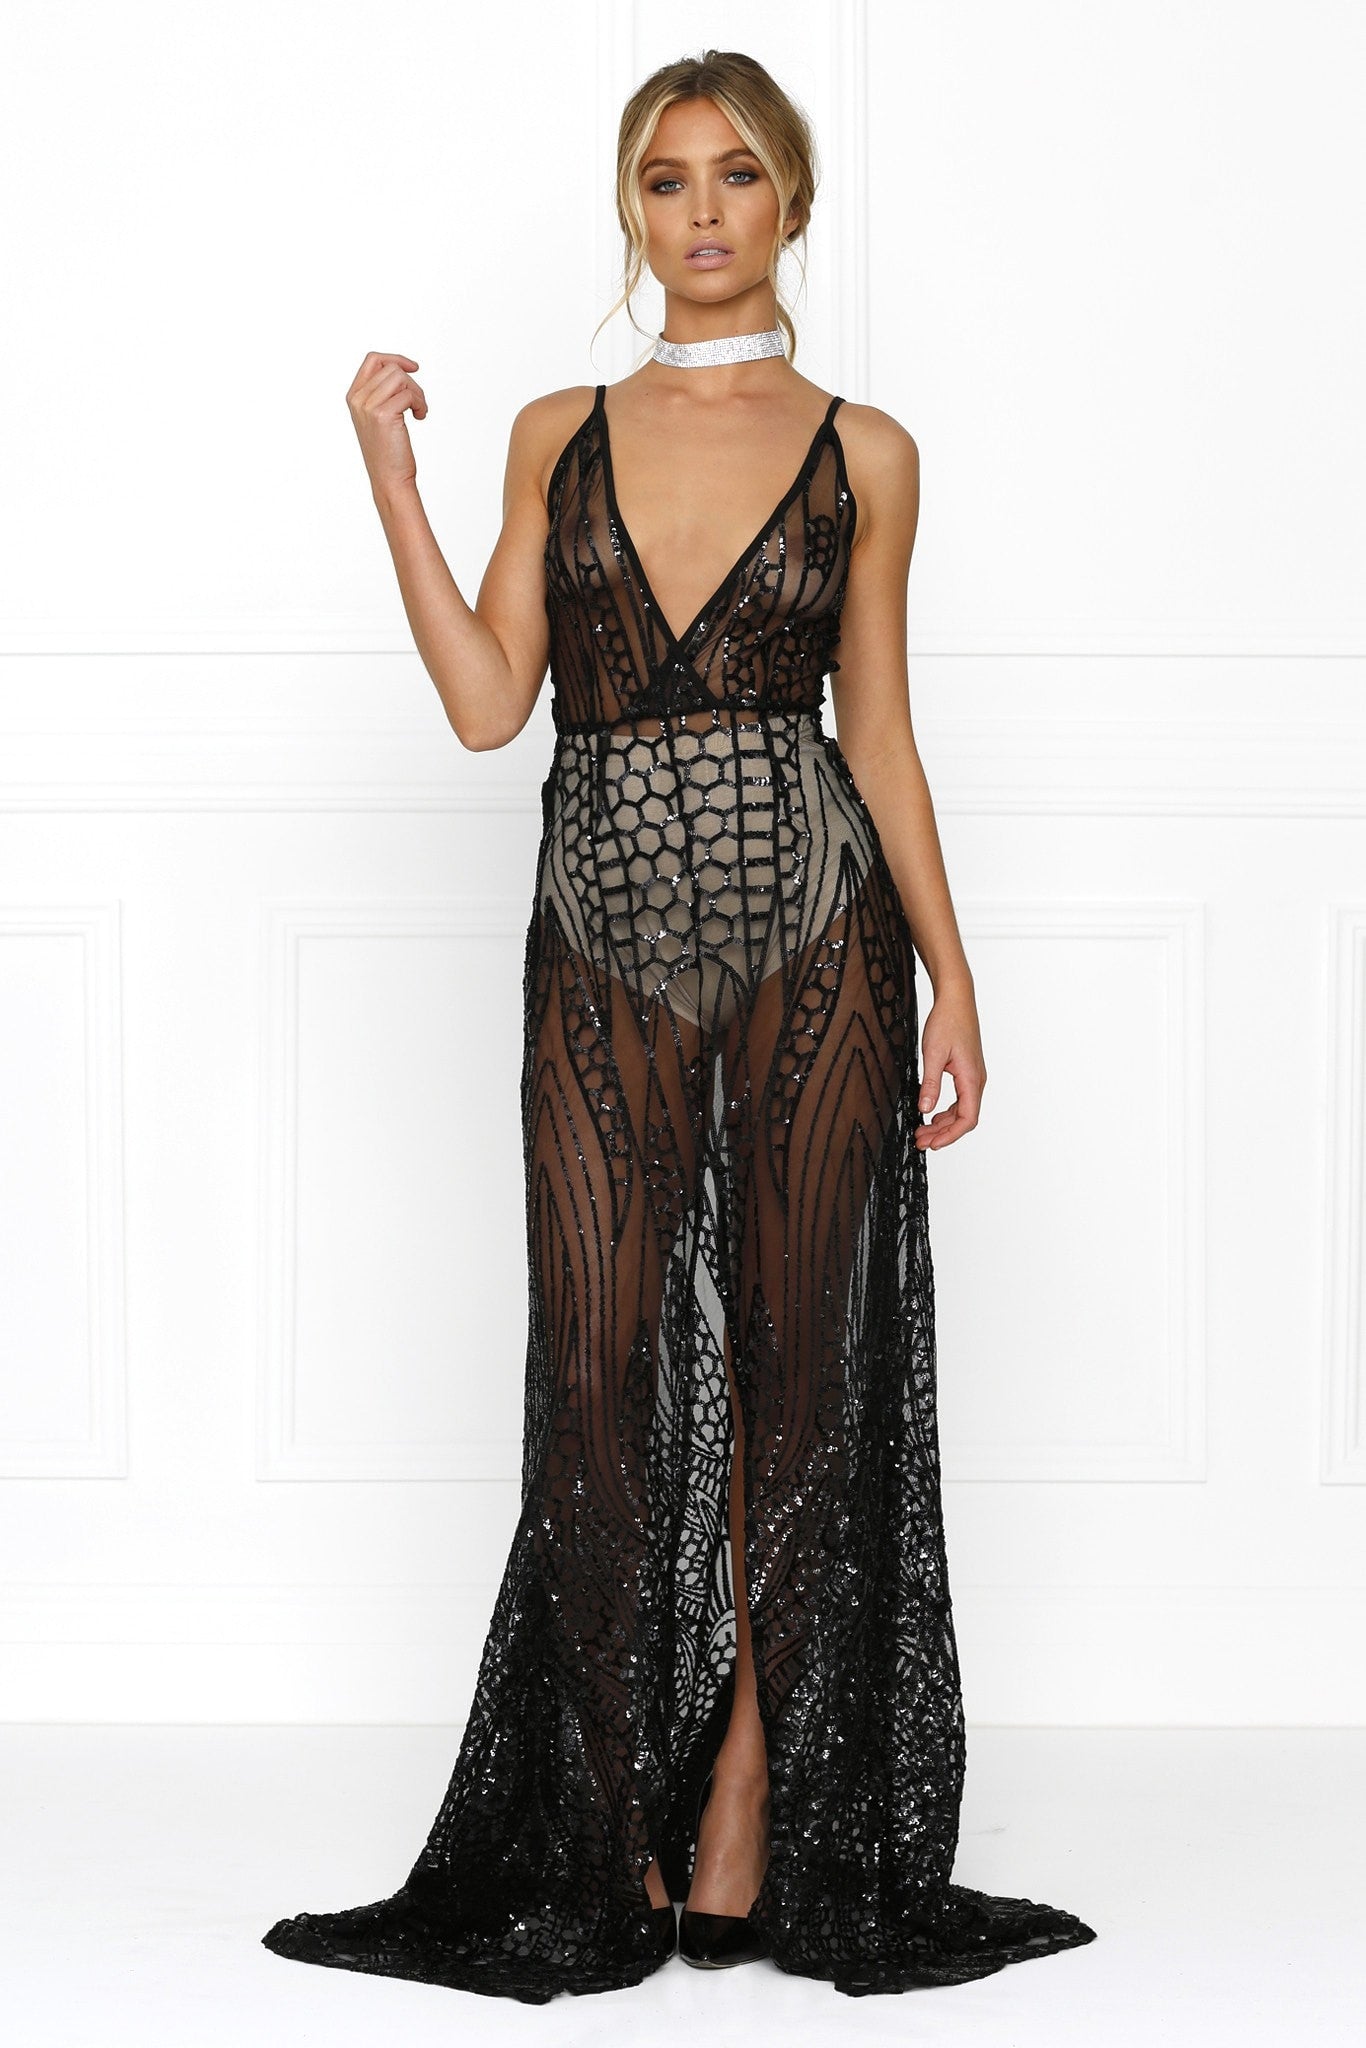 Honey Couture SIENA Black Sheer Sequin w Split Evening Gown Dress Honey Couture$ AfterPay Humm ZipPay LayBuy Sezzle